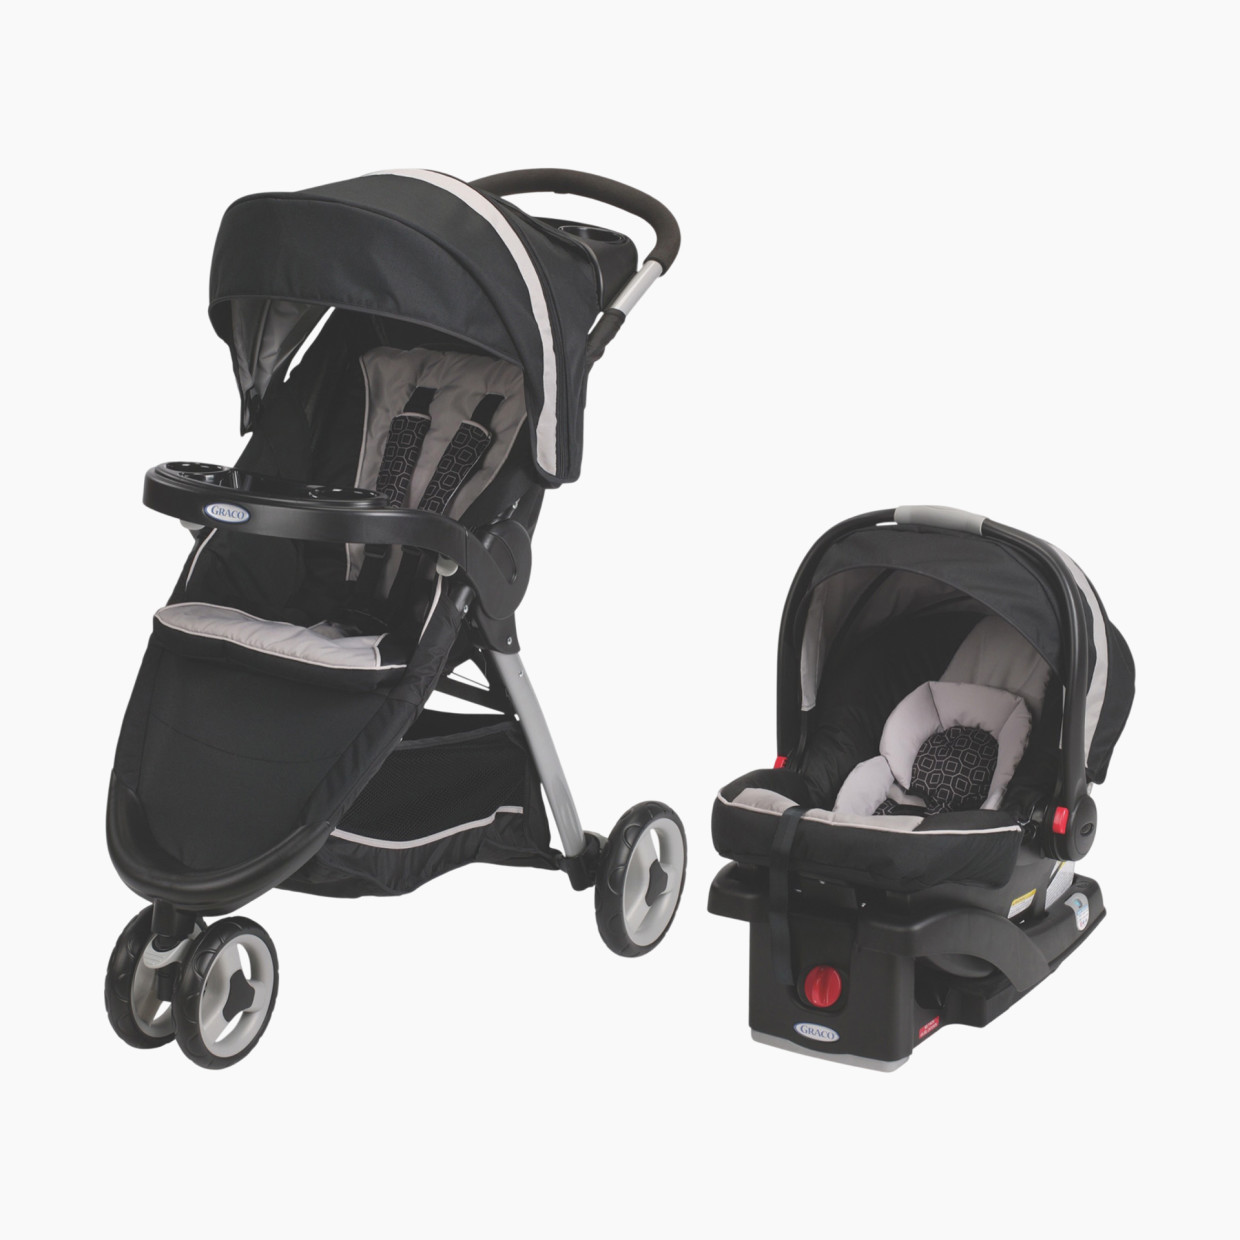 Graco FastAction Fold Sport Click Connect Travel System - Pierce.